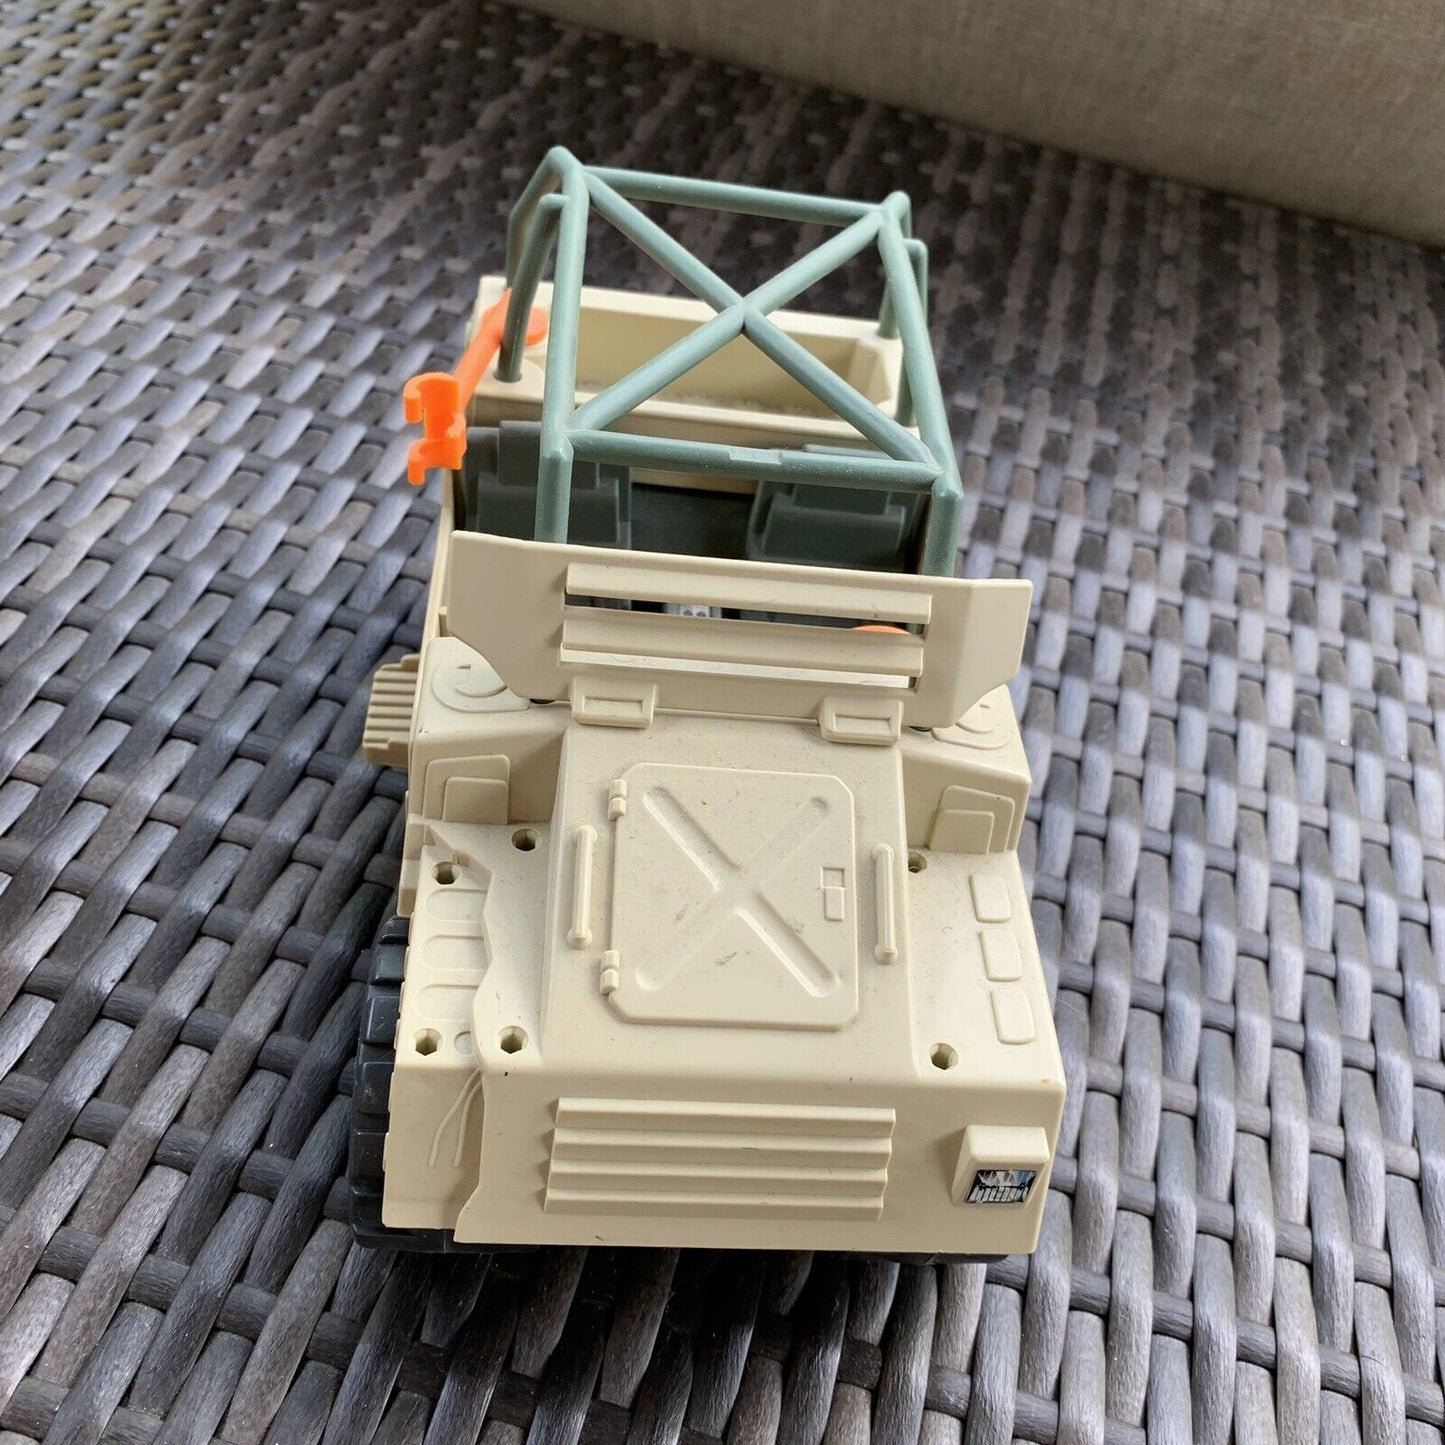 Vintage Jurassic Park The Lost World Net Trapper Jeep Vehicle Kenner 1997 Tan